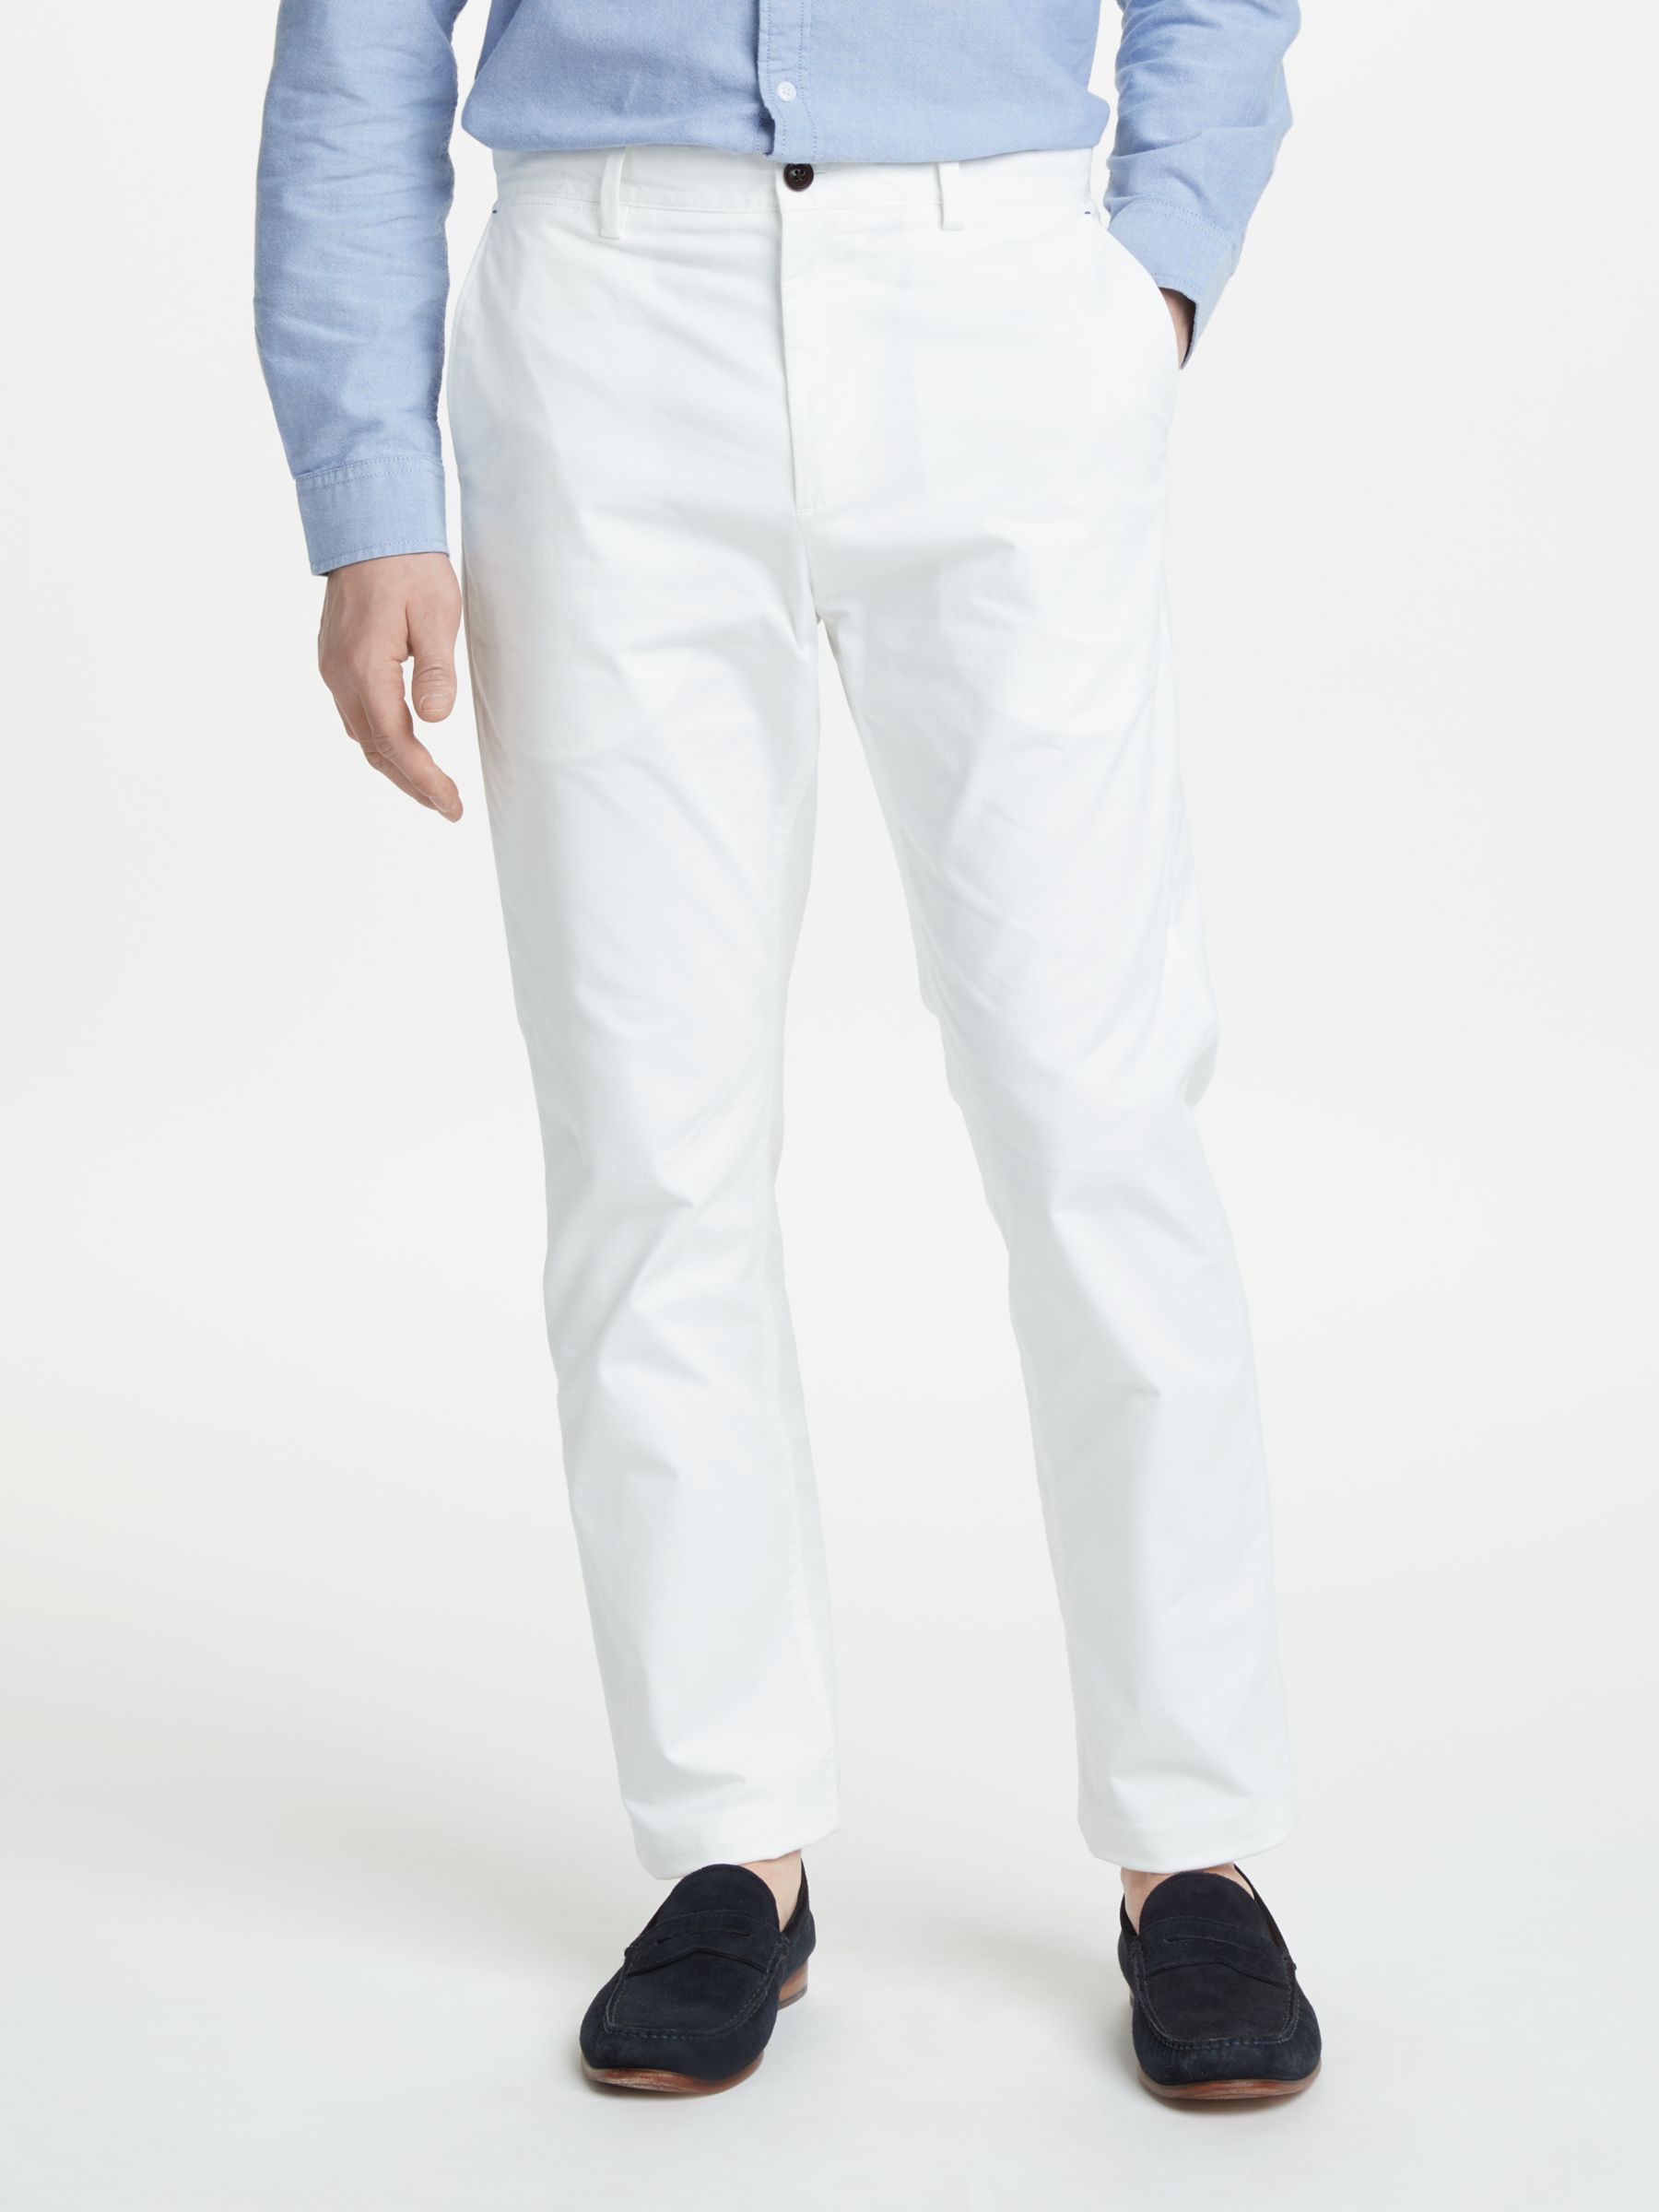 John Lewis & Partners Essential Chinos, White, 32S